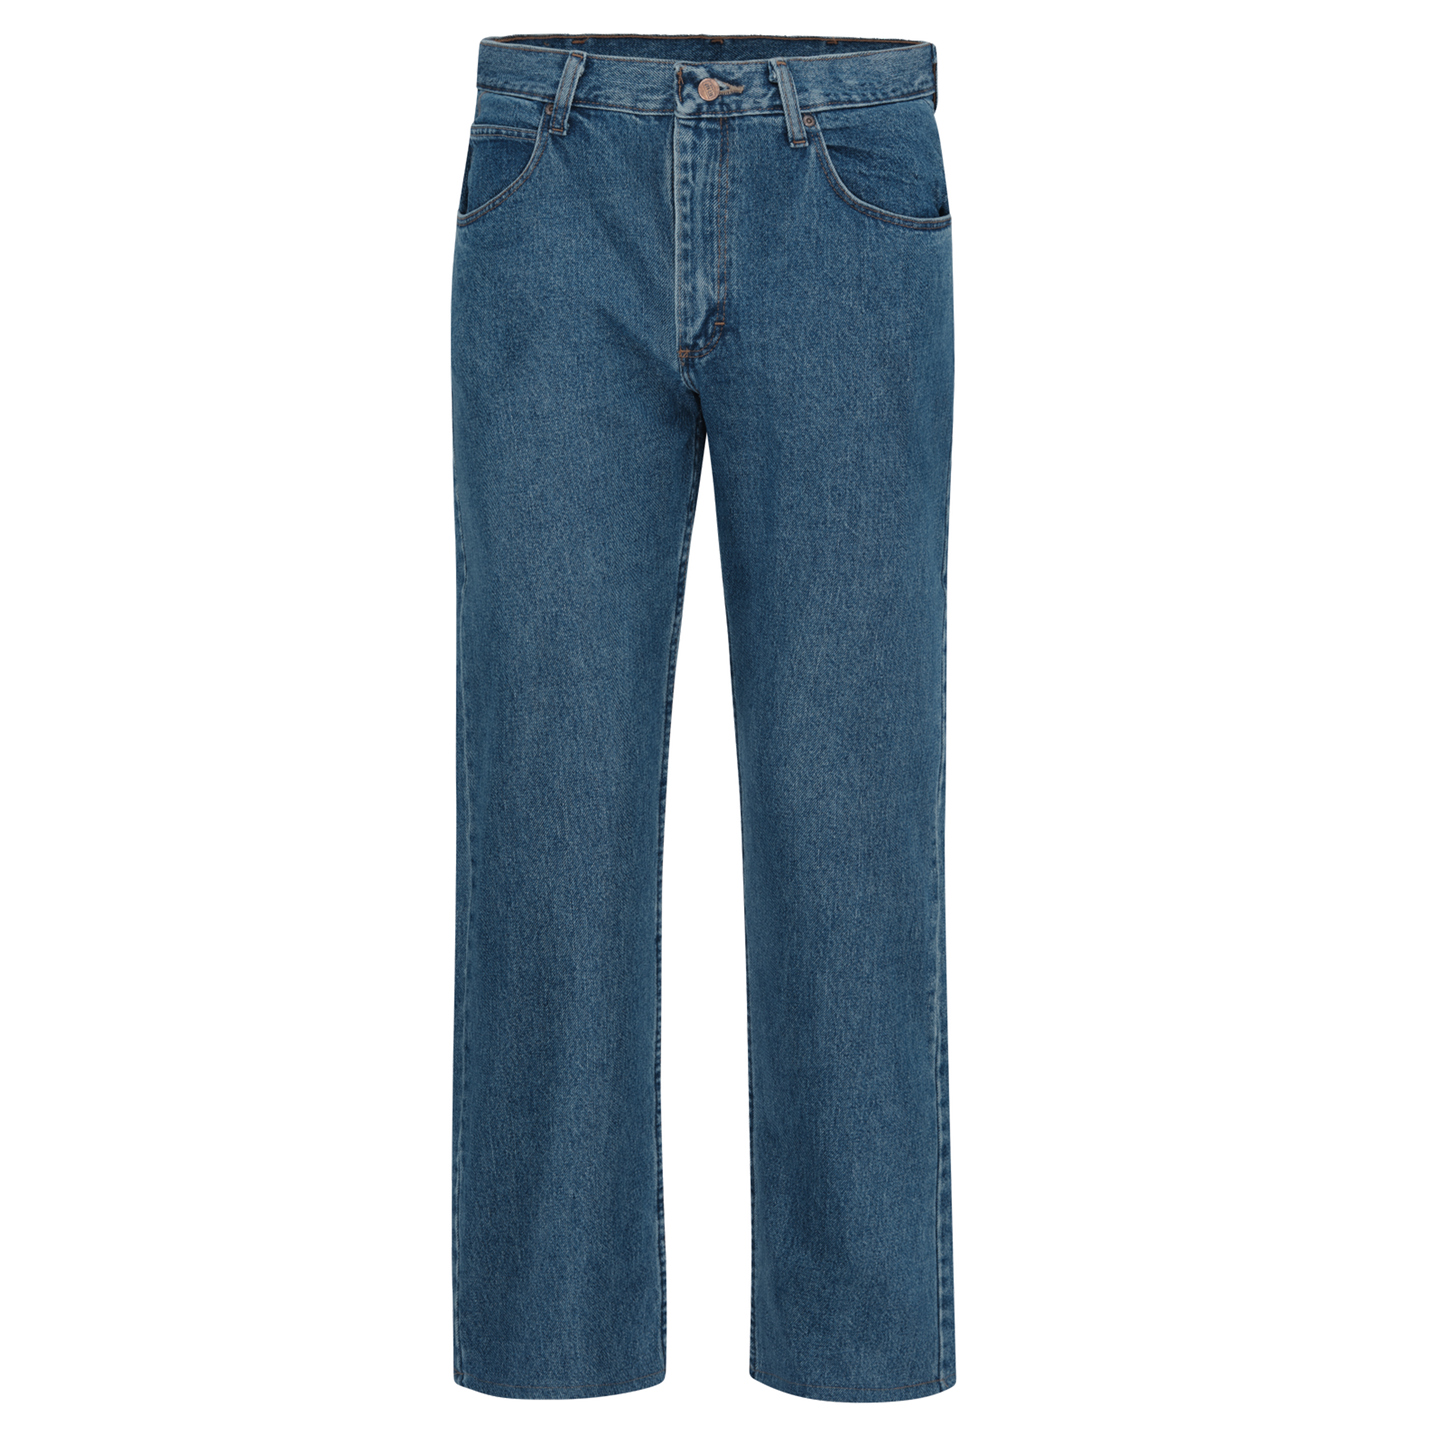 Red Kap - Men's Relaxed Fit Jean - PD60 - Stonewash